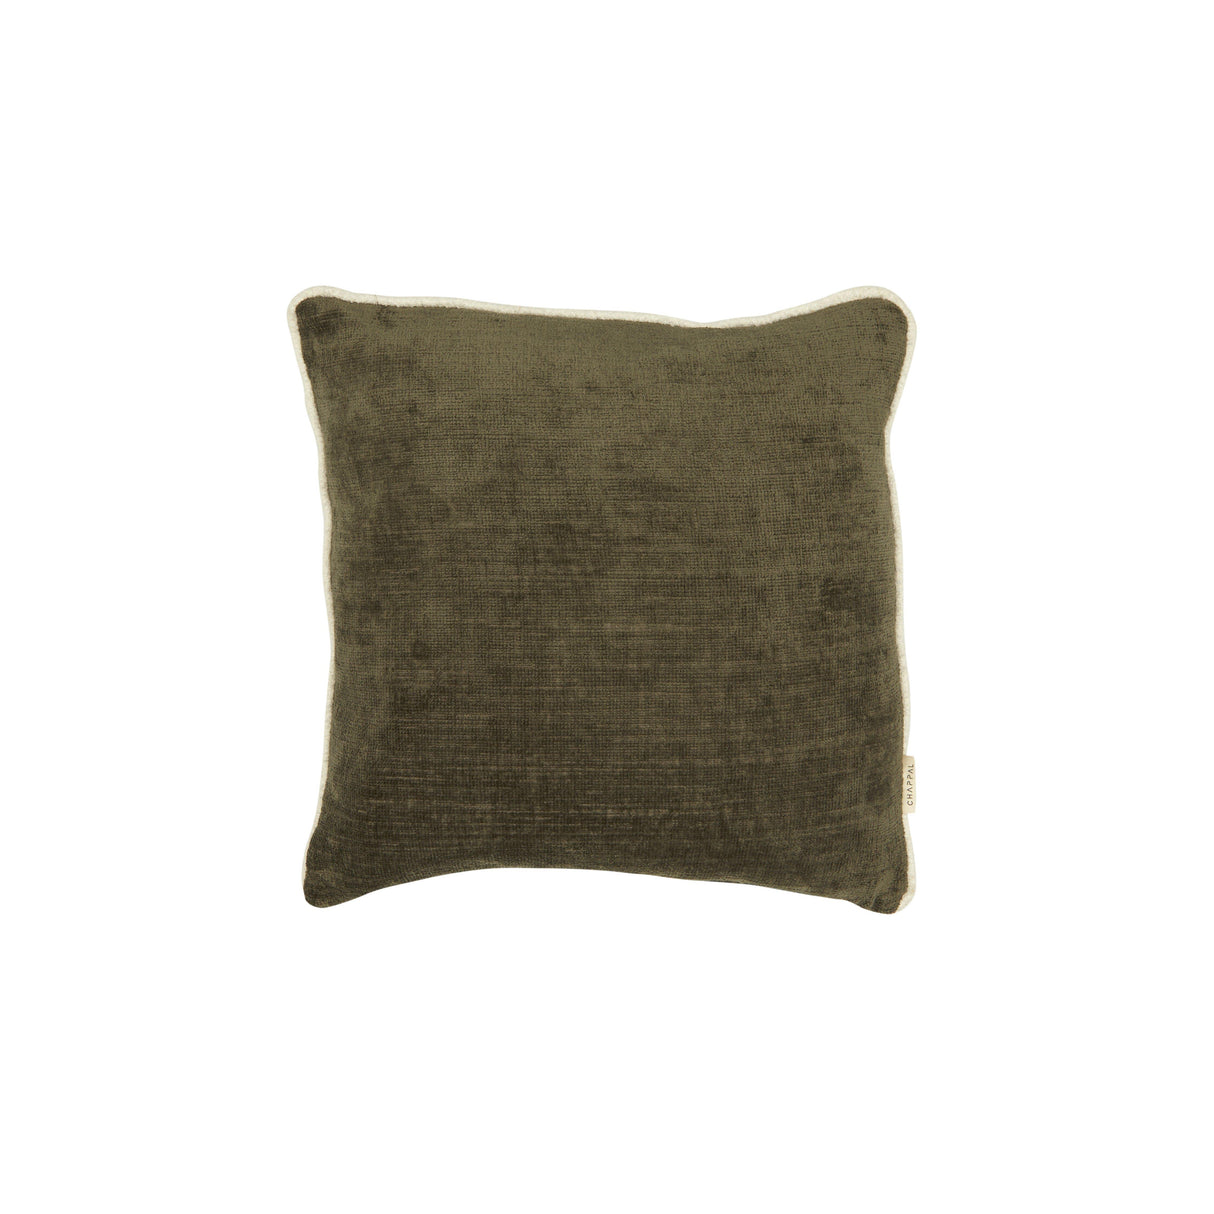 Khaki Curly Throw Pillow with White Piping